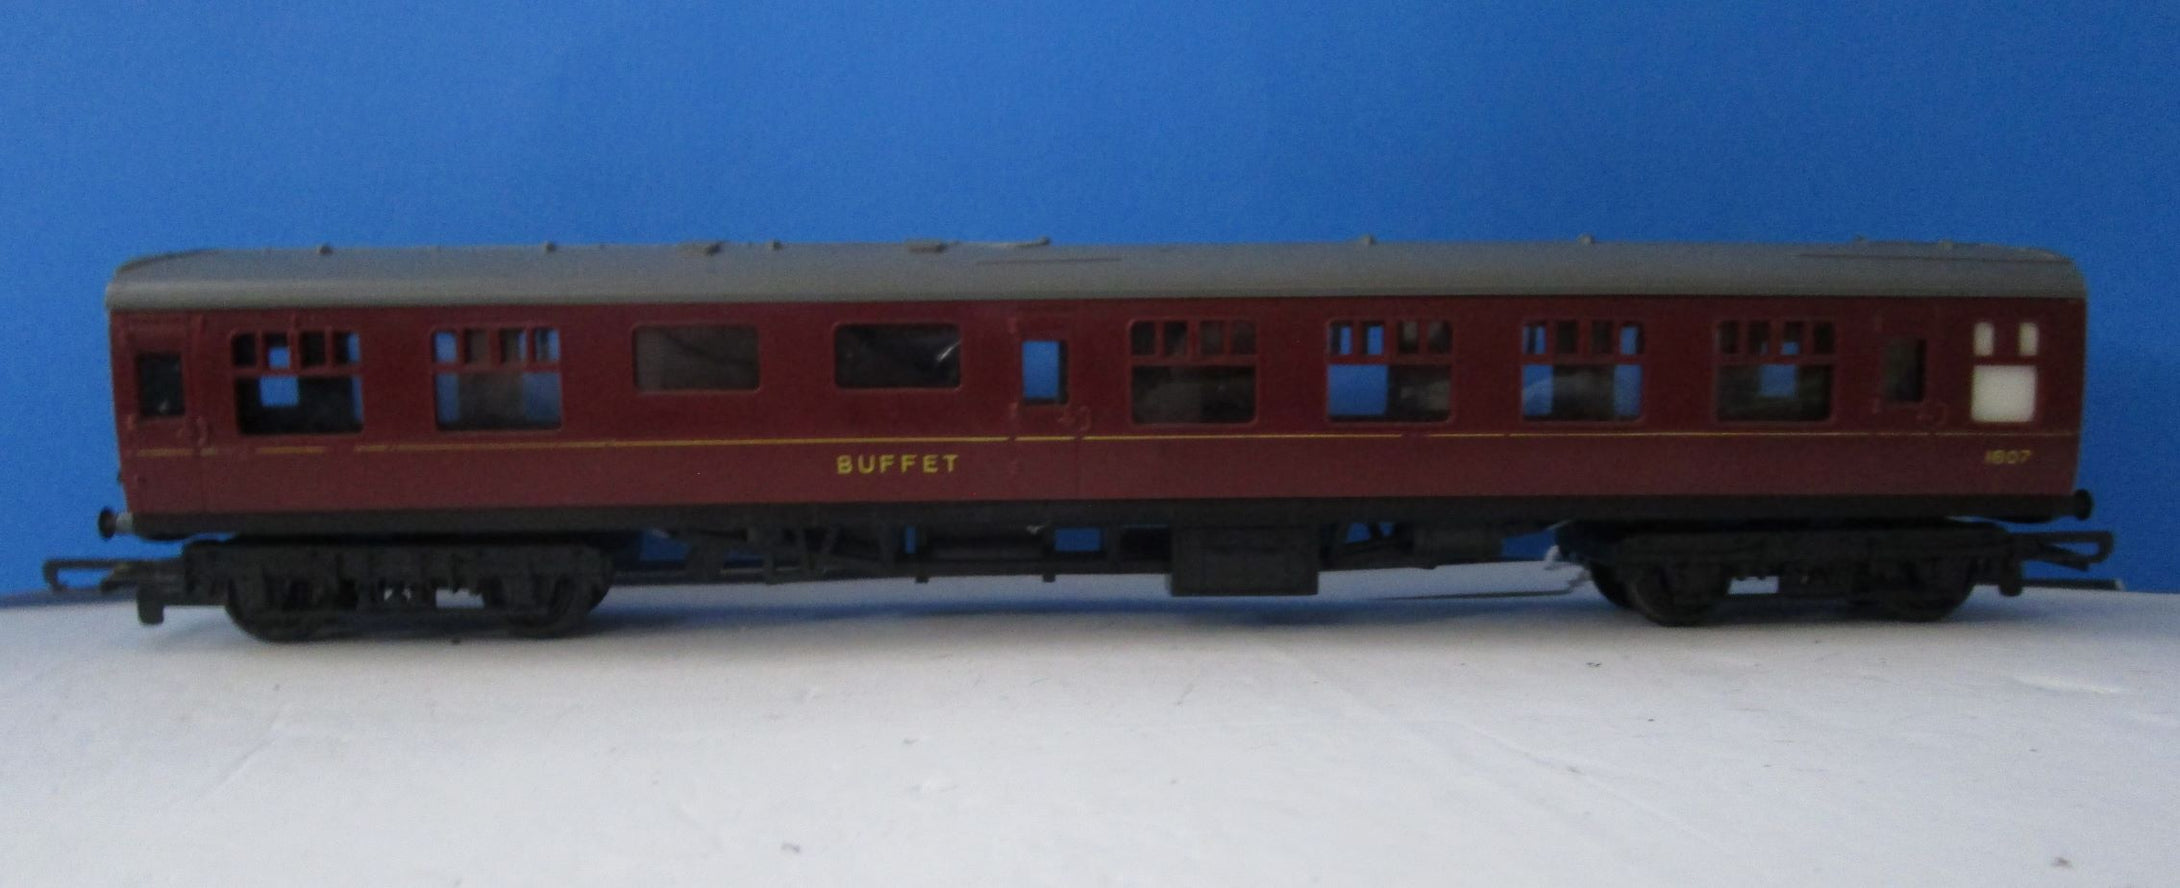 R424A HORNBY Mk1 Buffet Car 1807 in BR Maroon - UNBOXED